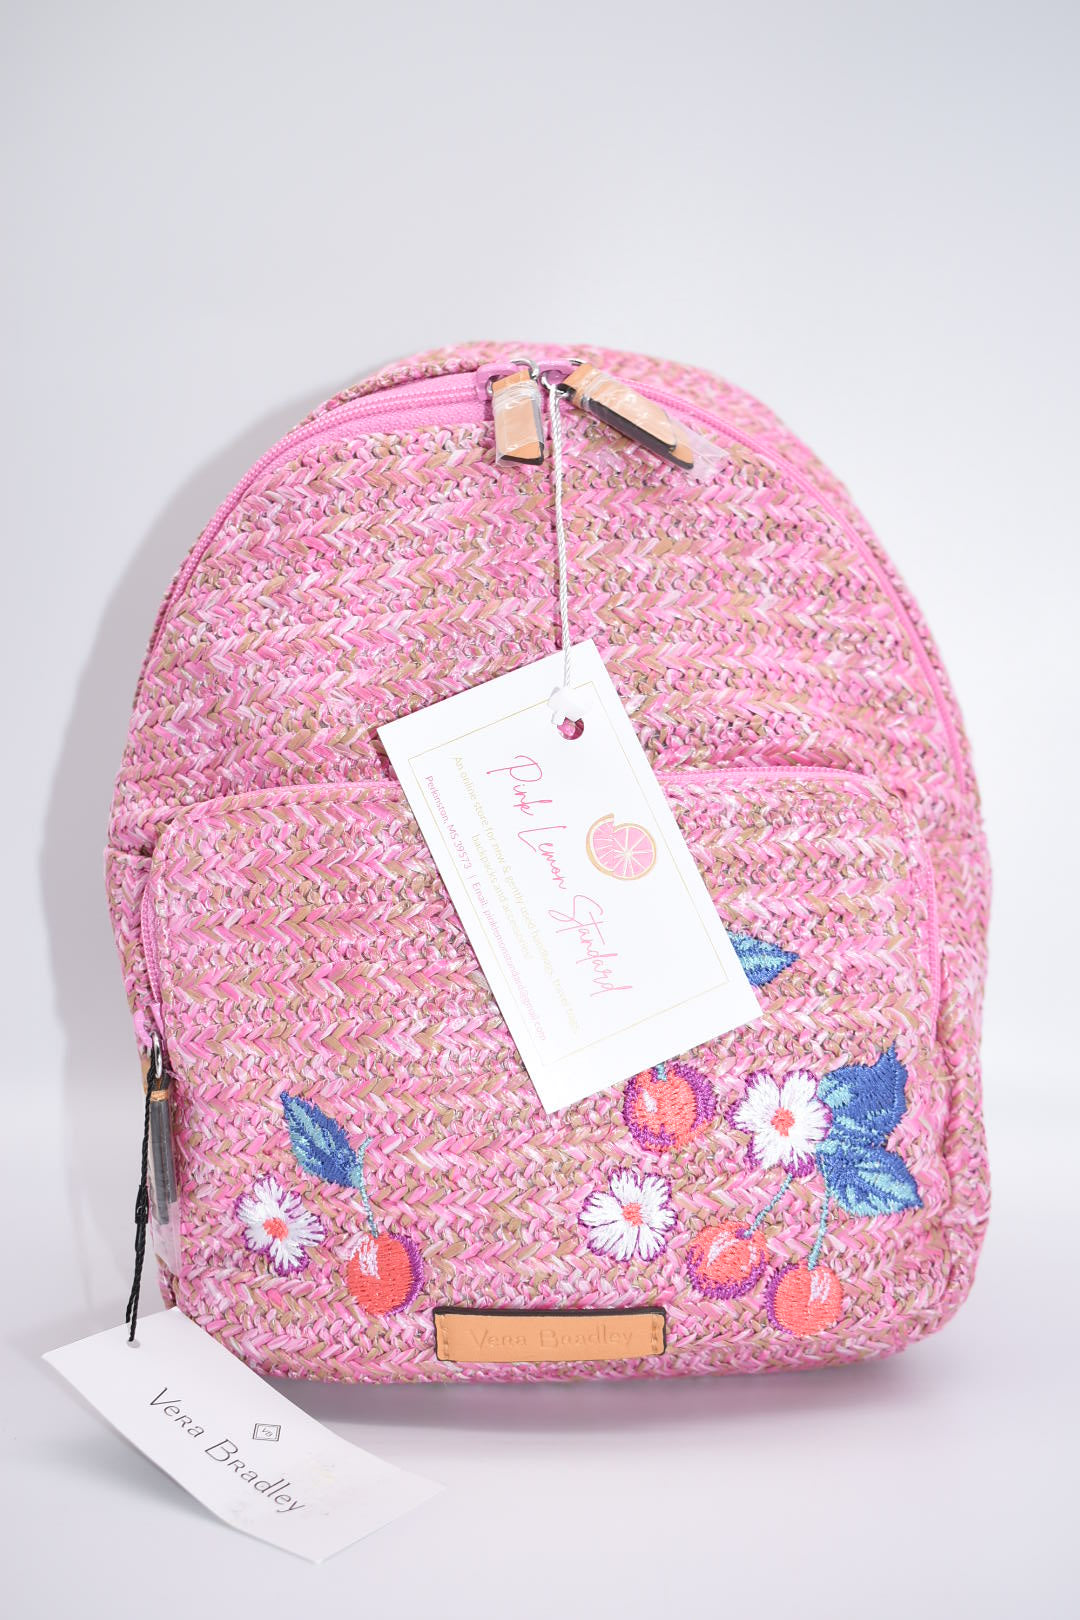 Vera Bradley Pink Embroidered Cherry Straw Backpack